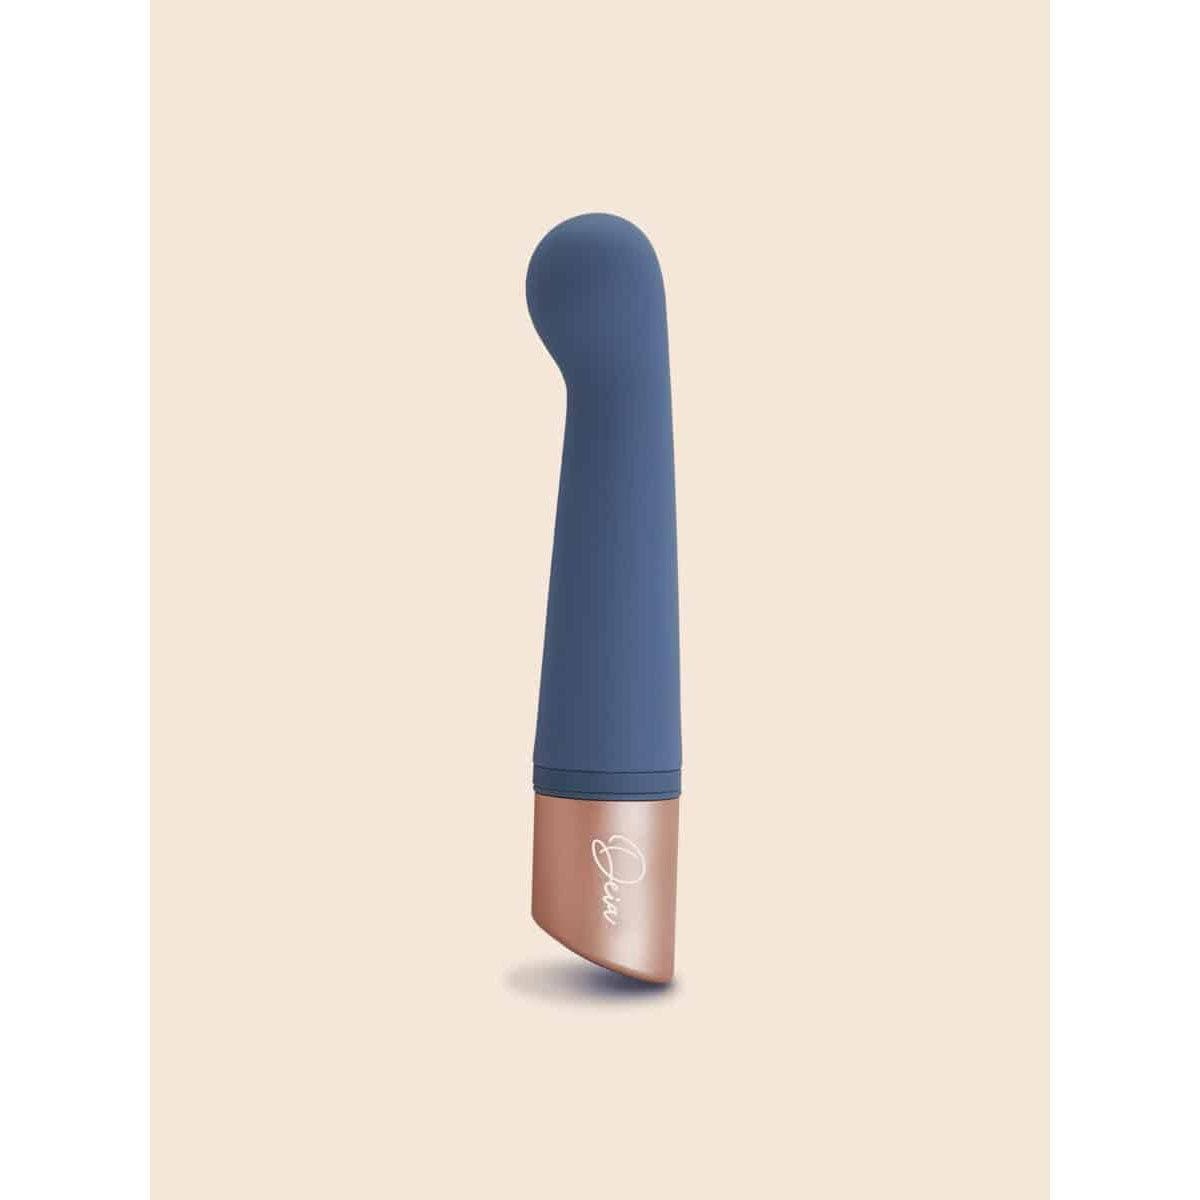 Deia The Couple G-Spot and Bullet 10 Vibration Silicone Massager Blue - Romantic Blessings